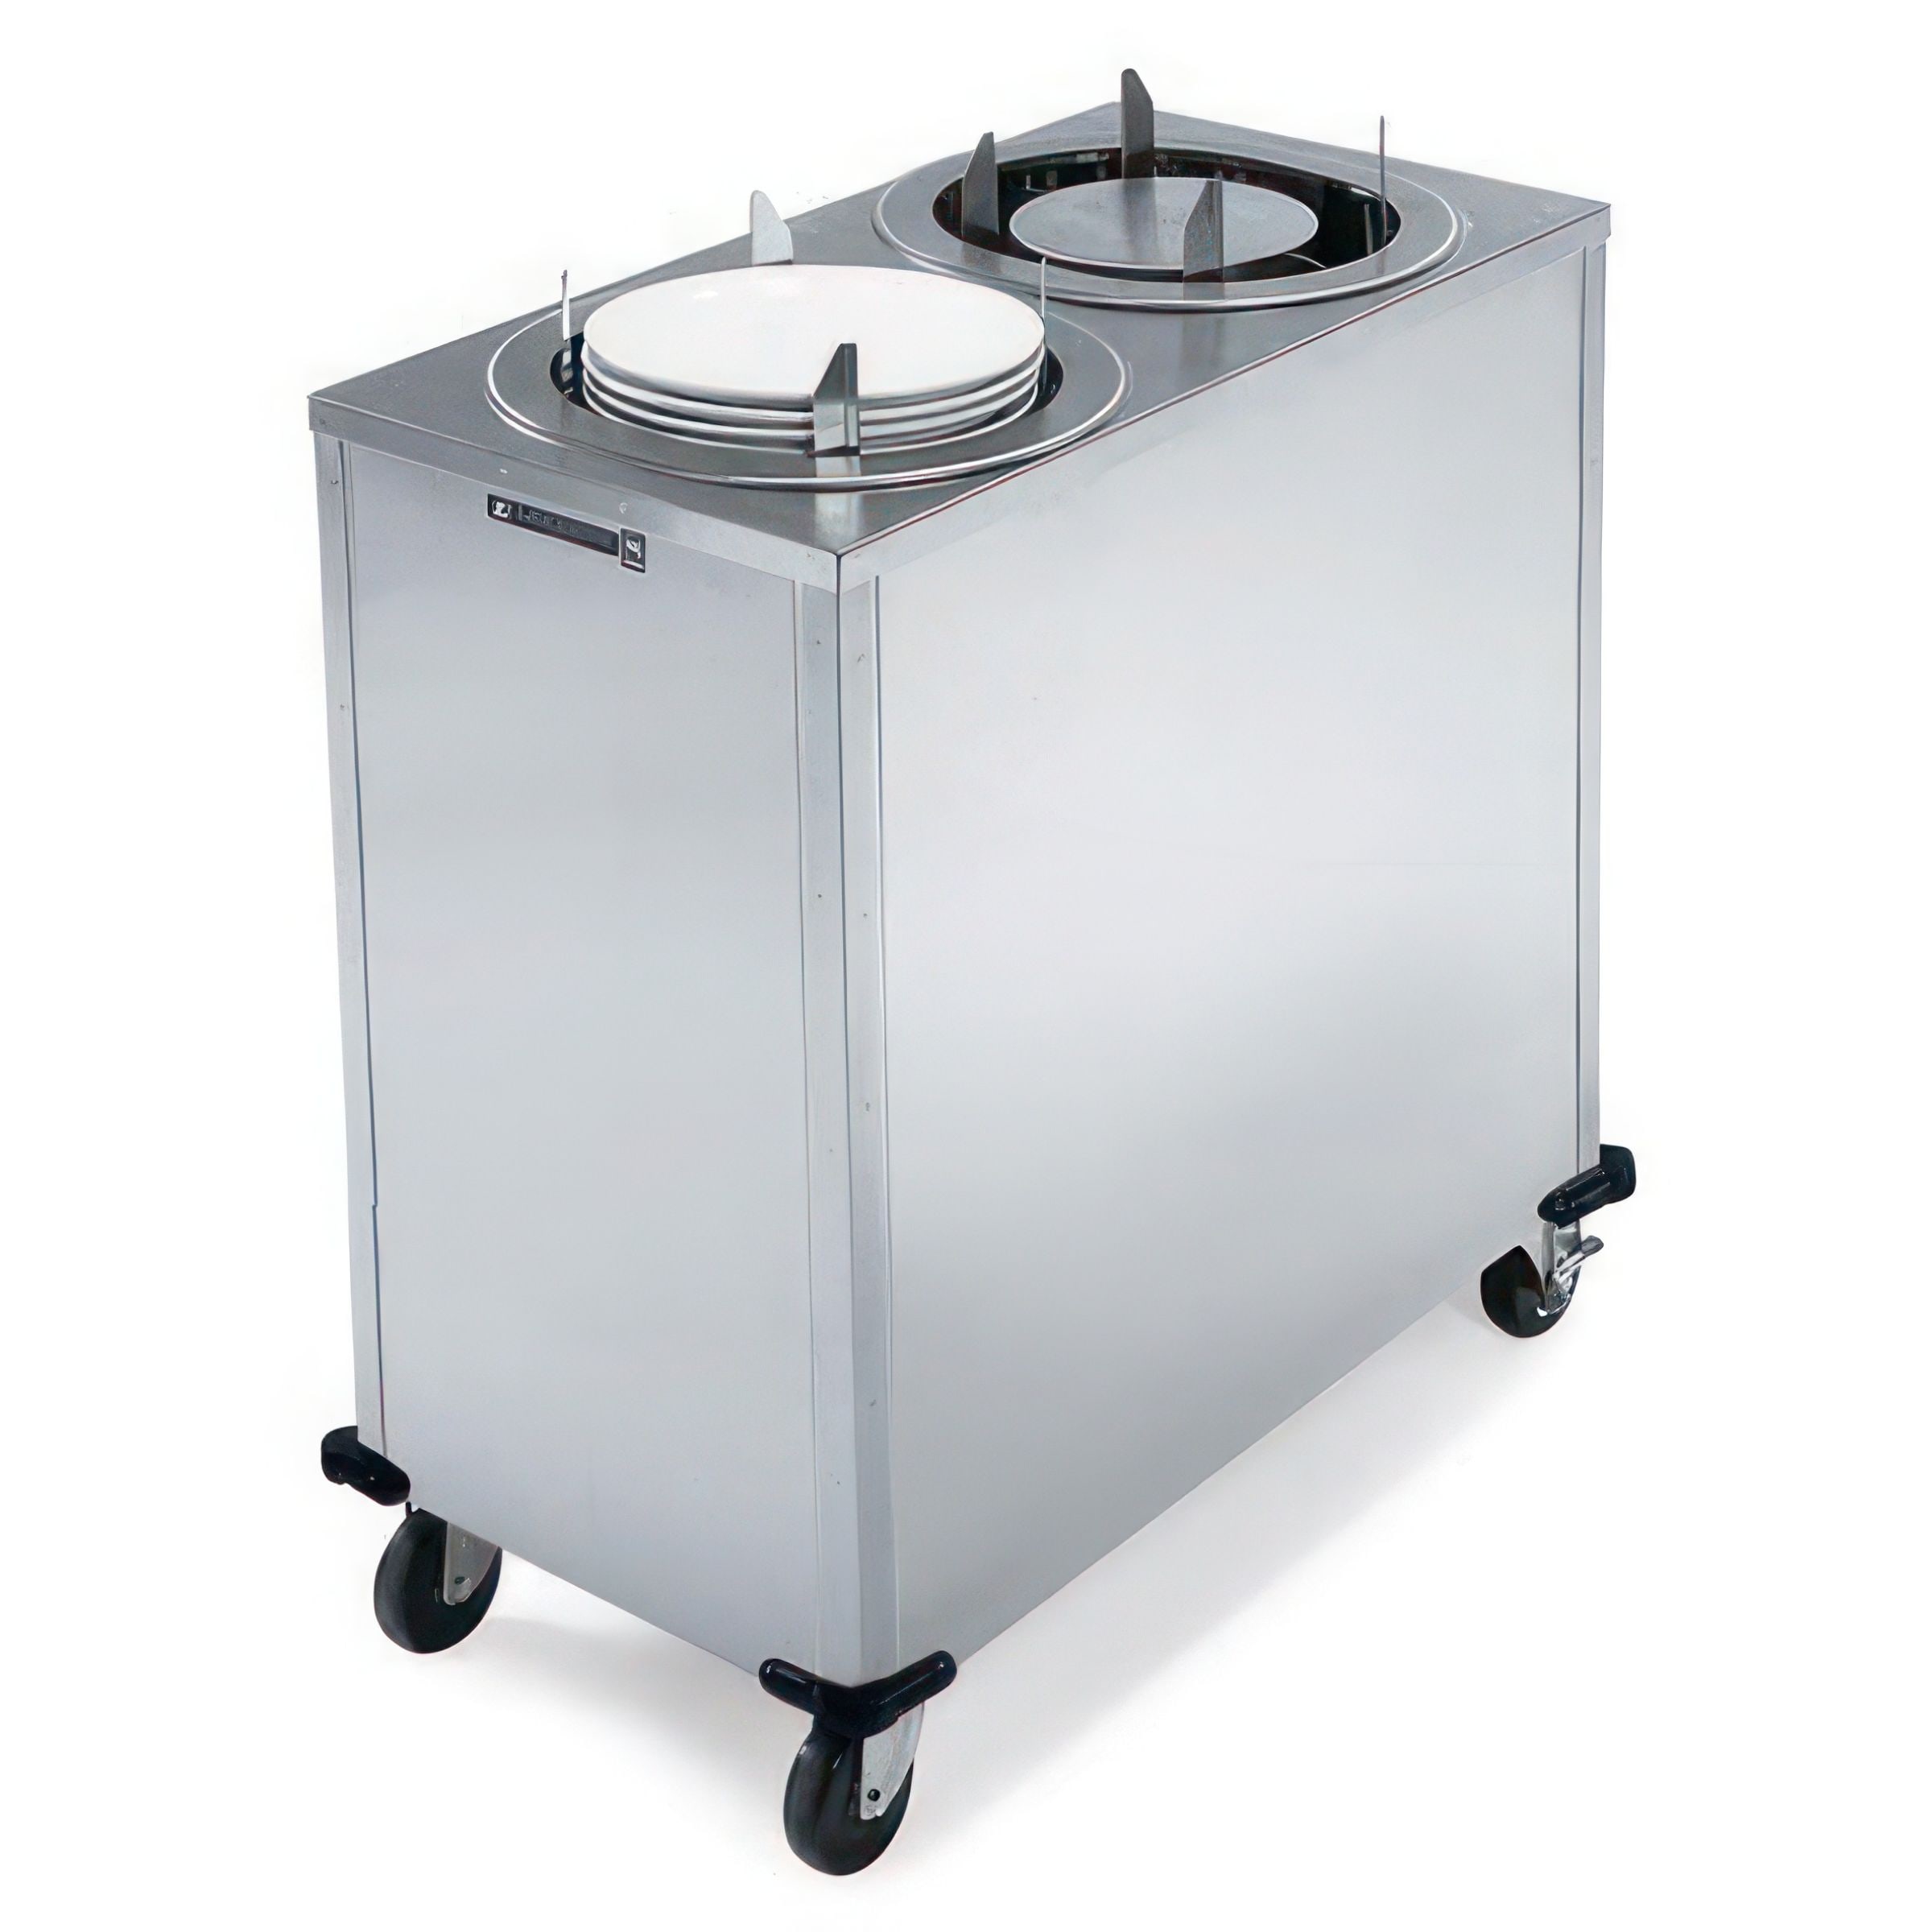 Lakeside 992 Mobile Plate Dispenser, Heated, Adjust-a-Fit®, Two Stack, for  8-3/4 x 9-3/4 to 11-3/8 x 13-1/2 Inch Oval Plates